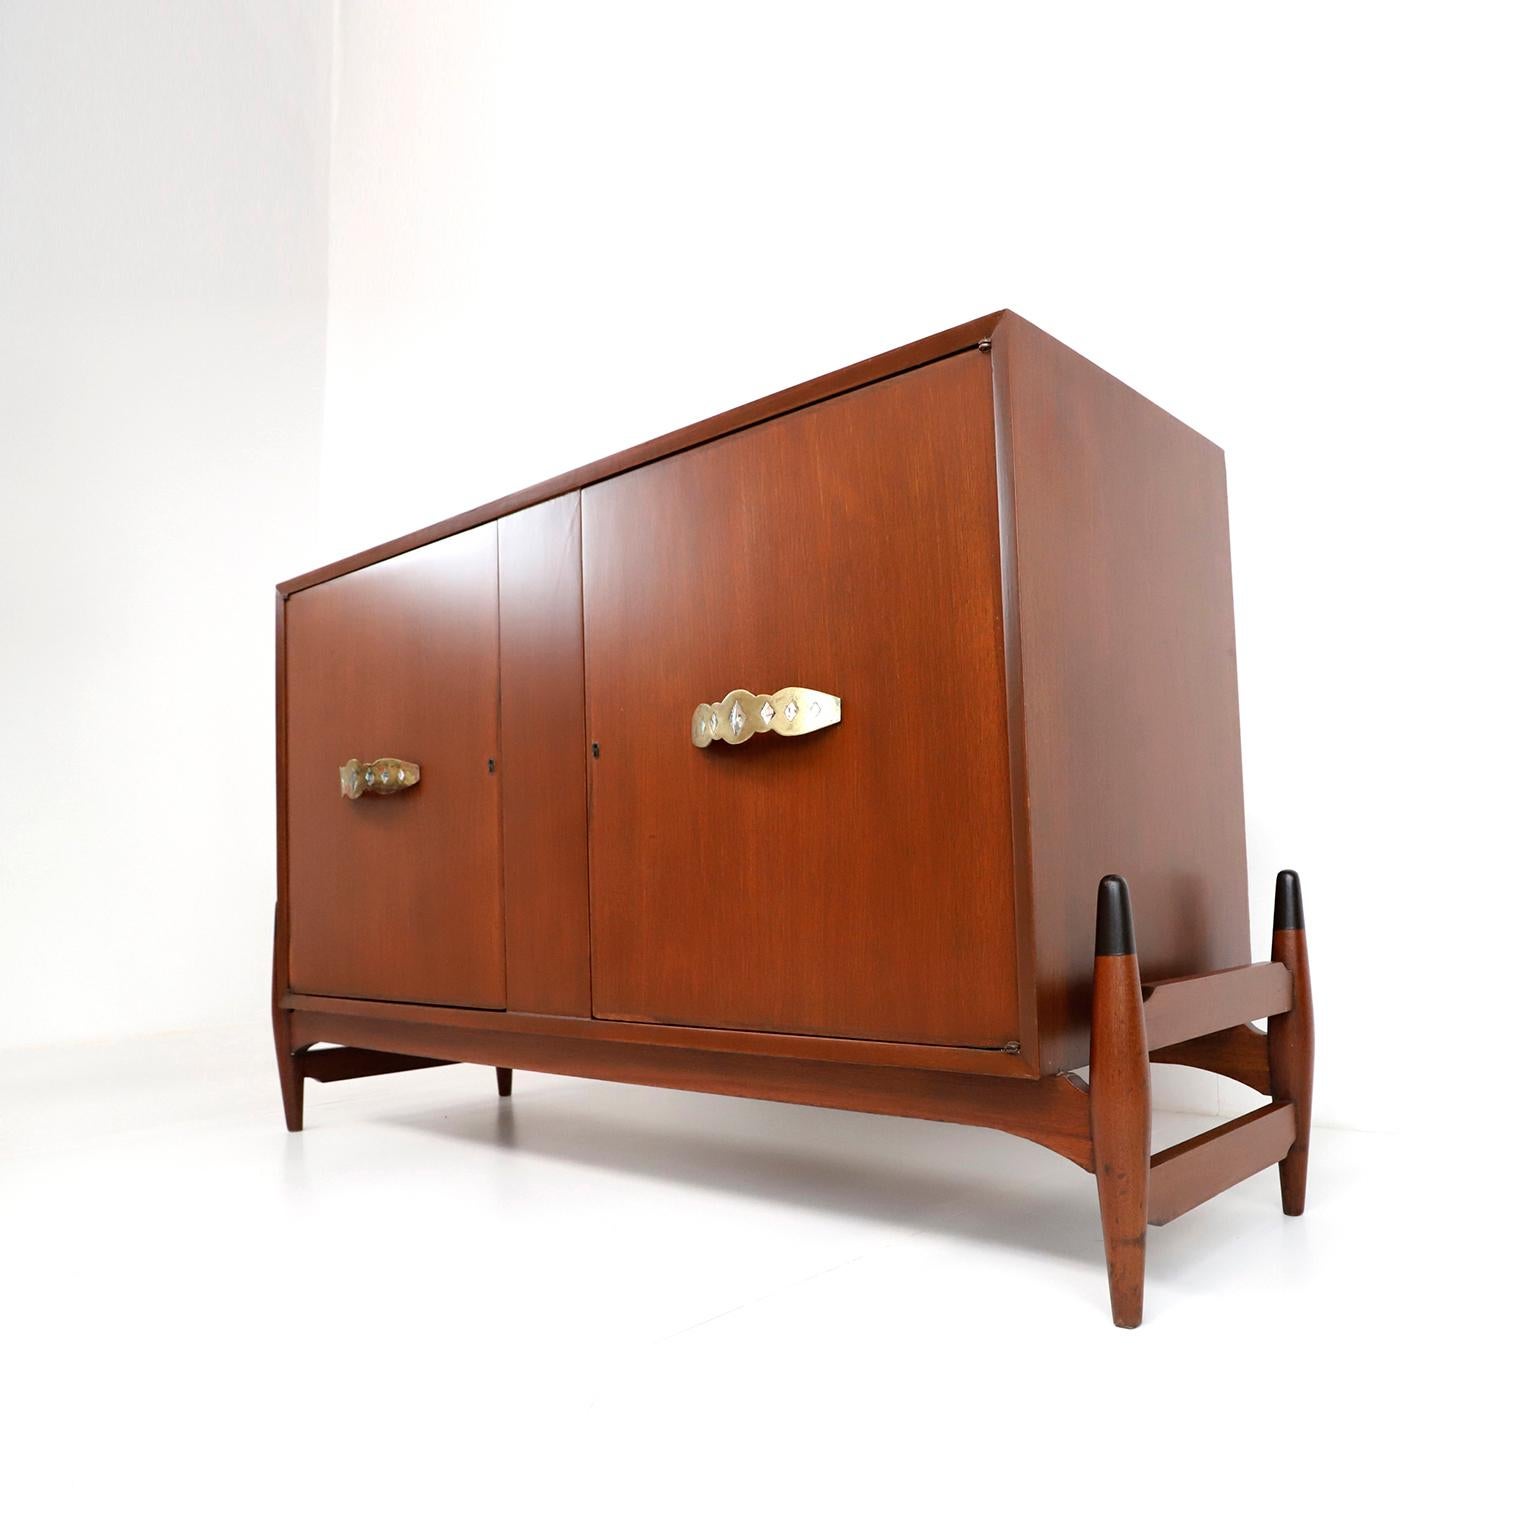 If you are searching for a piece that represents the most iconic and amazing Mexican Modernist era, we have for you this rare Frank Kyle Credenza, made in top quality mahogany wood with excellent workmanship, circa 1950. The 2 beautiful pulls are